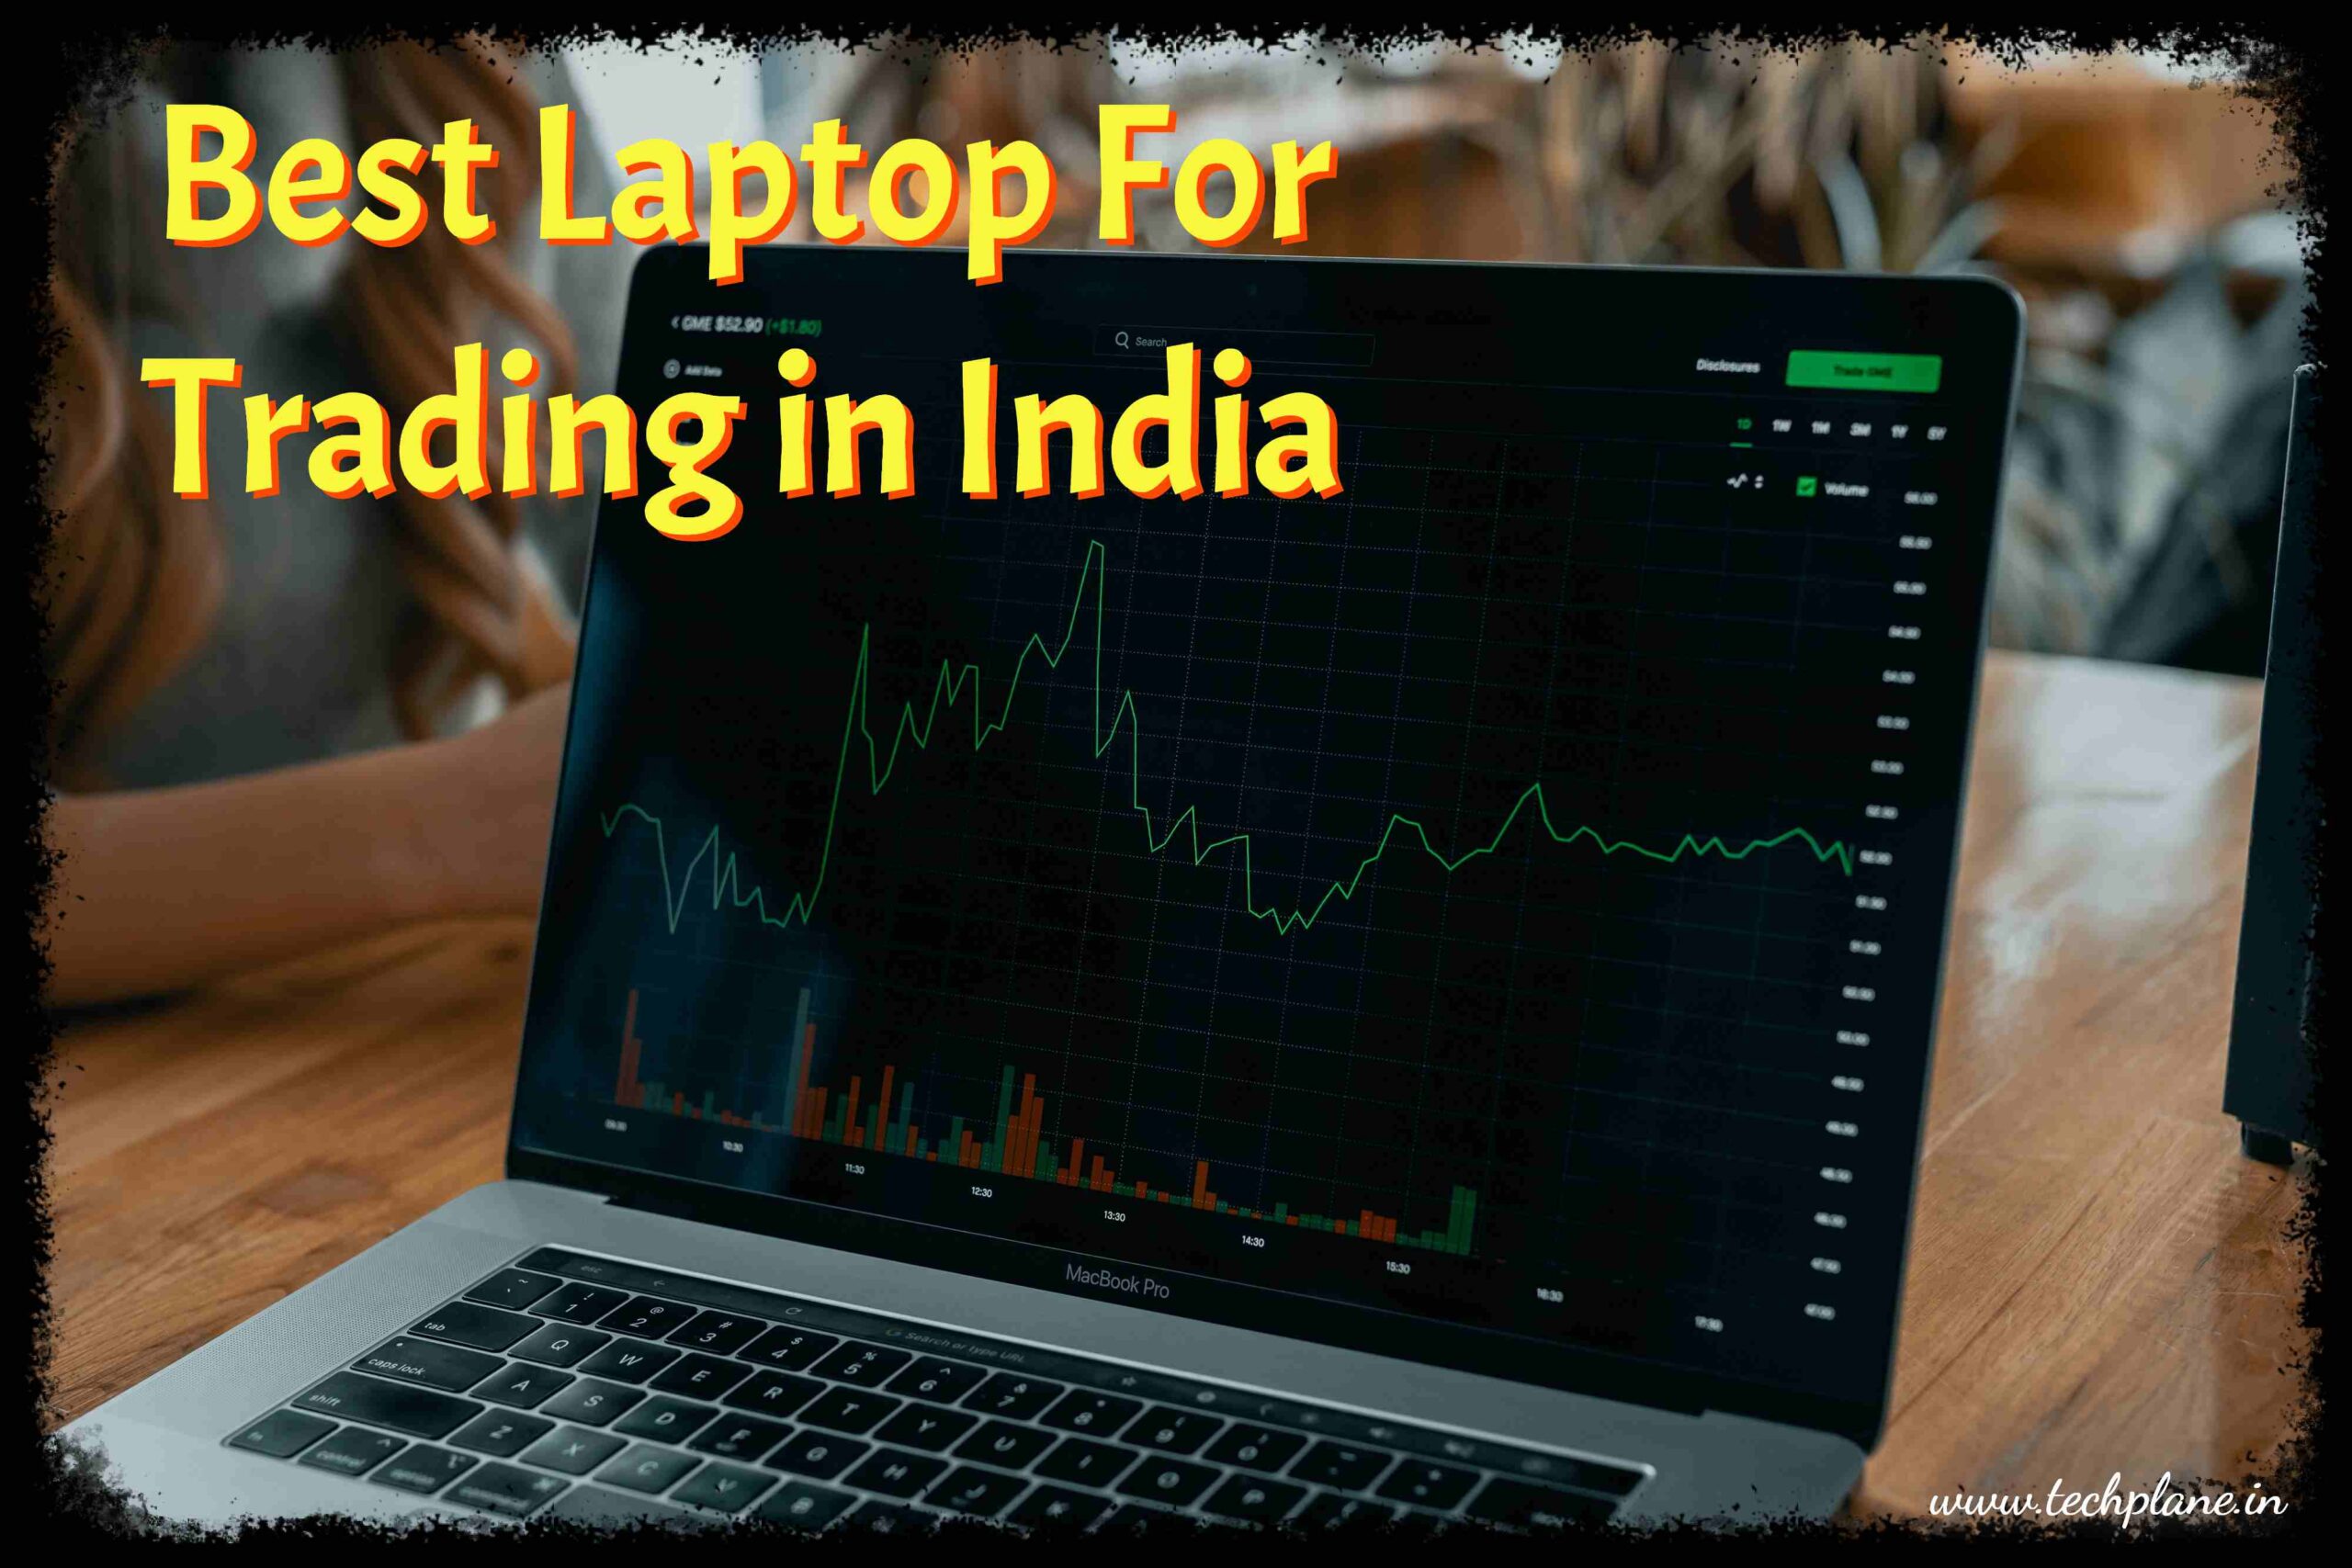 Best Laptop For Trading in India